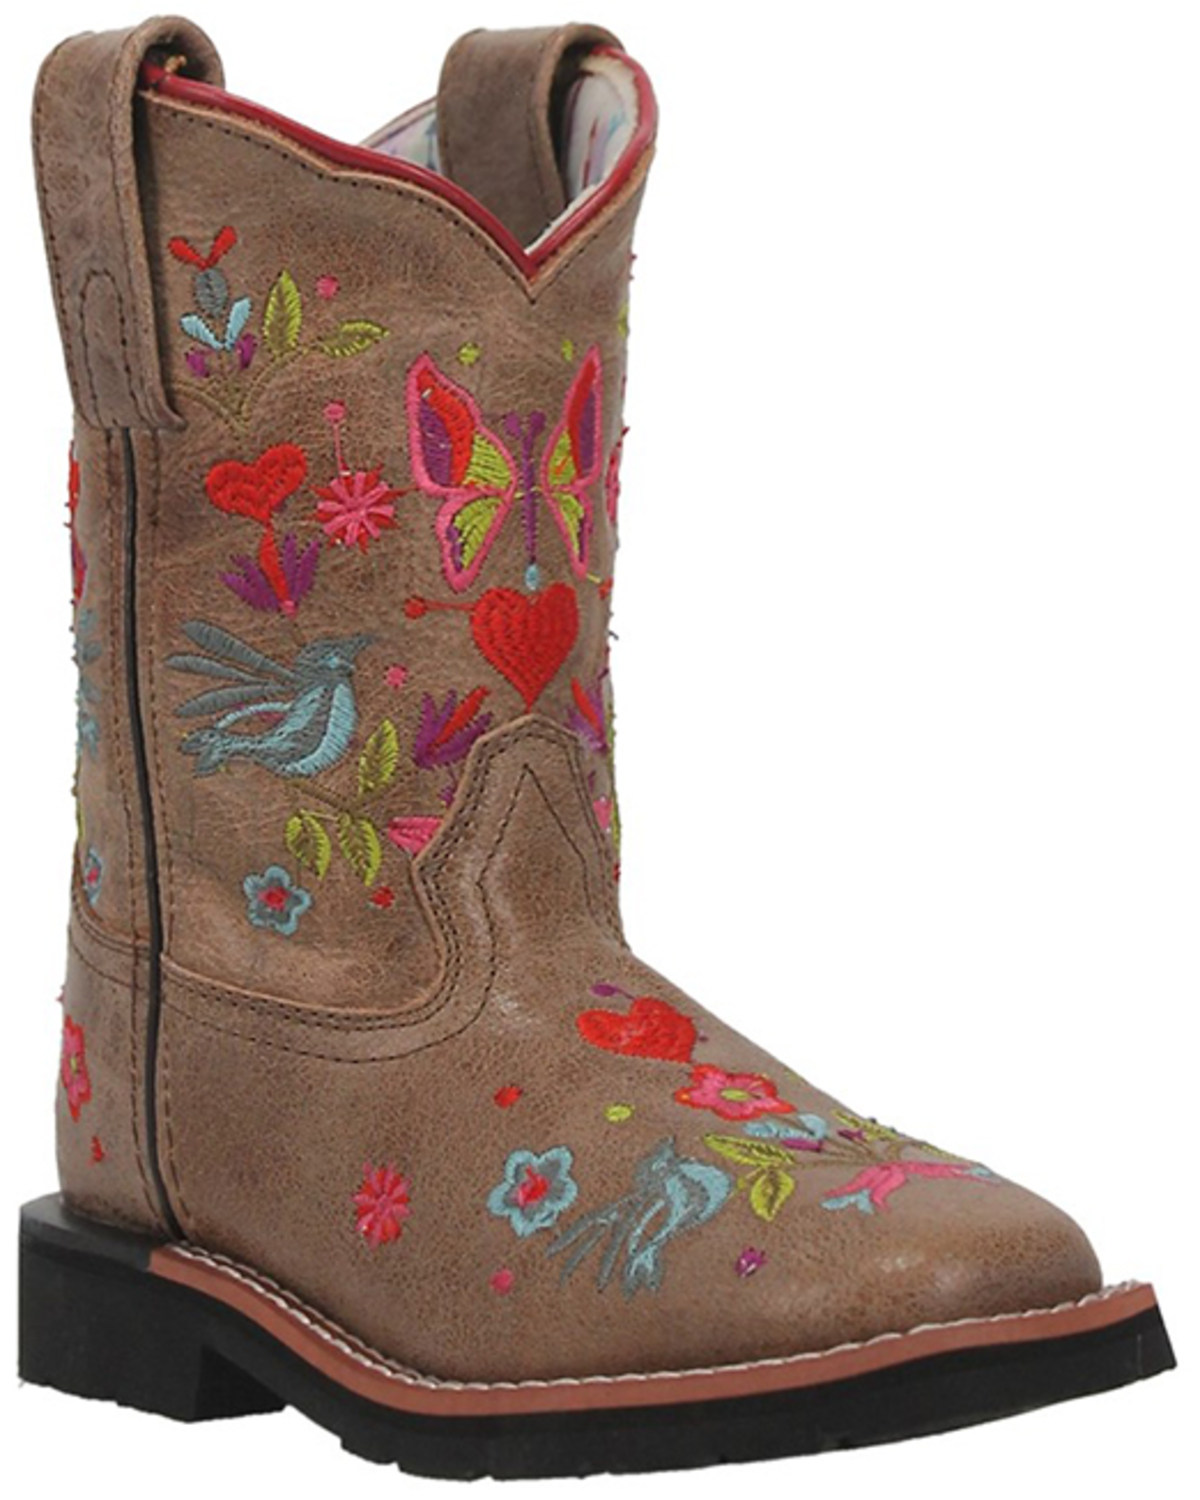 Dan Post Girls' Floral Embroidered Western Boots - Square Toe